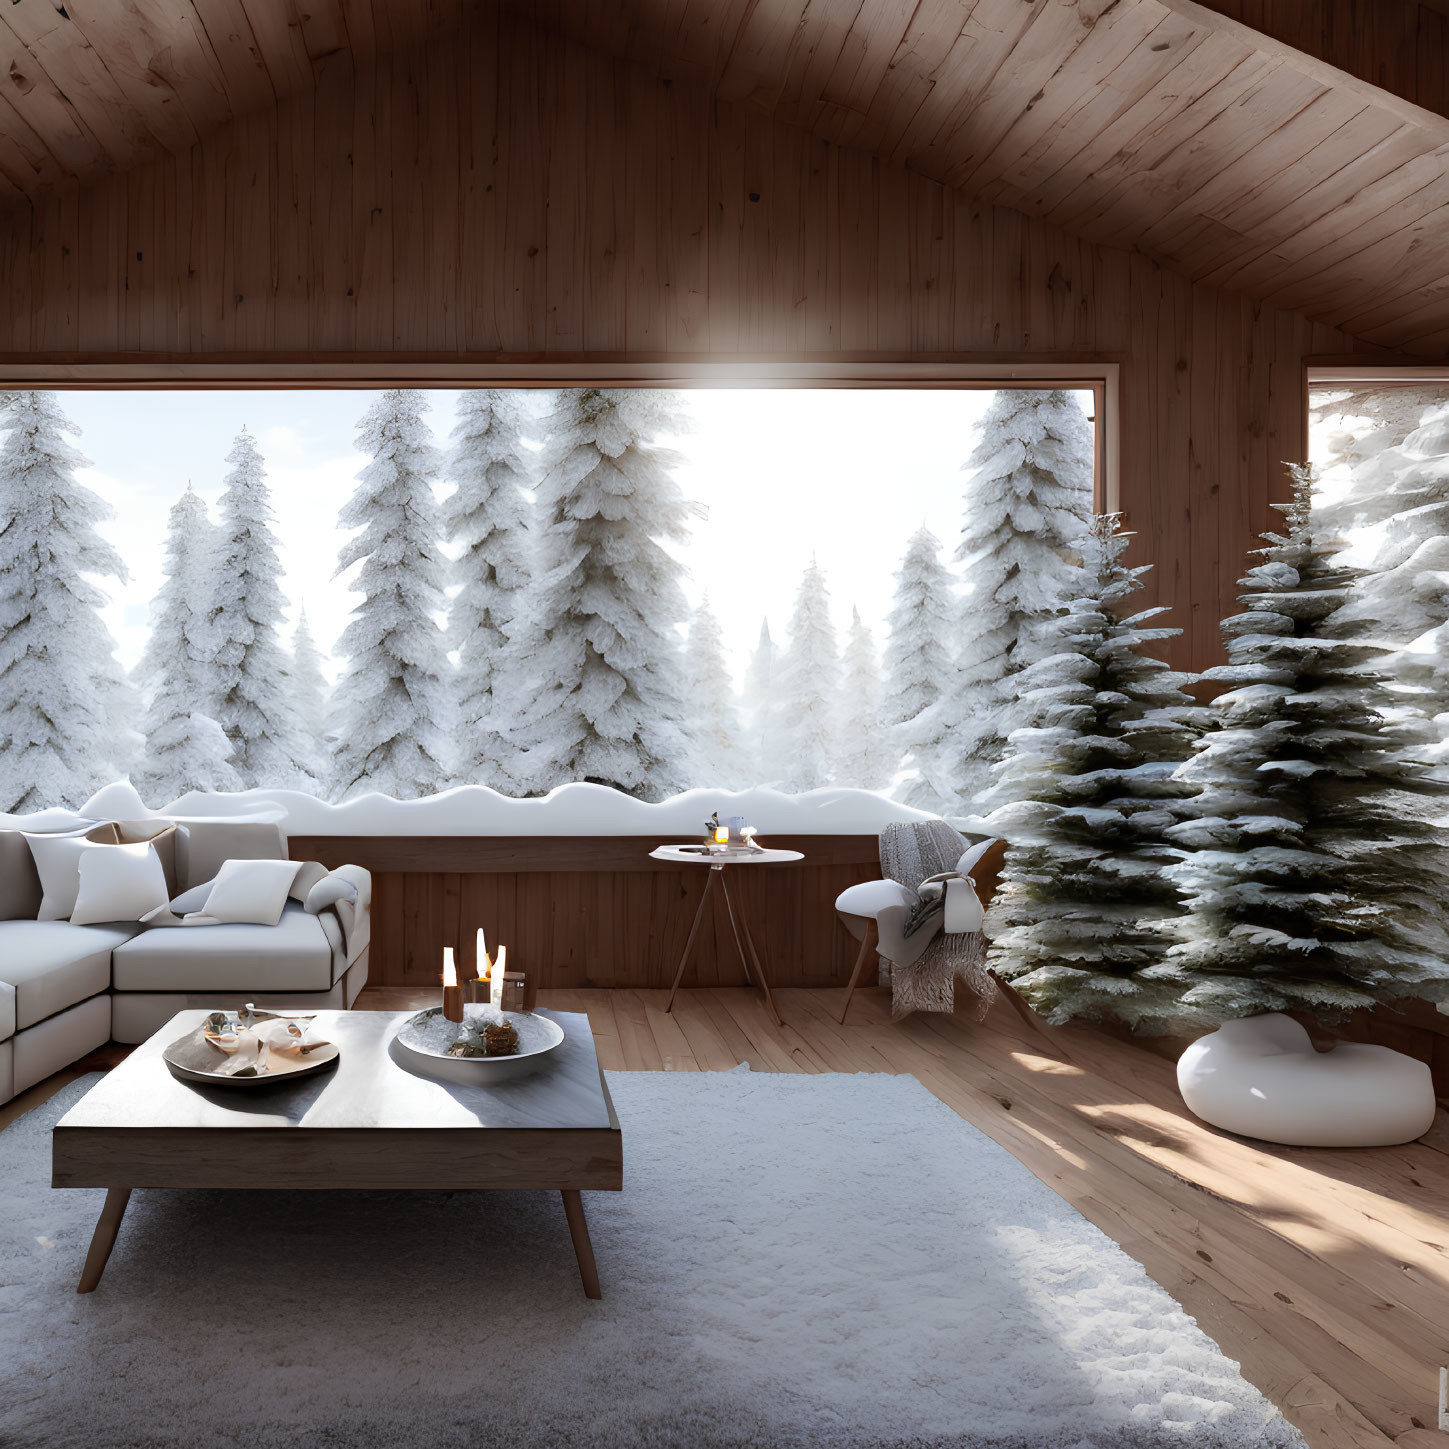 Snowy forest view from cozy wooden cabin interior with white sofas and candles